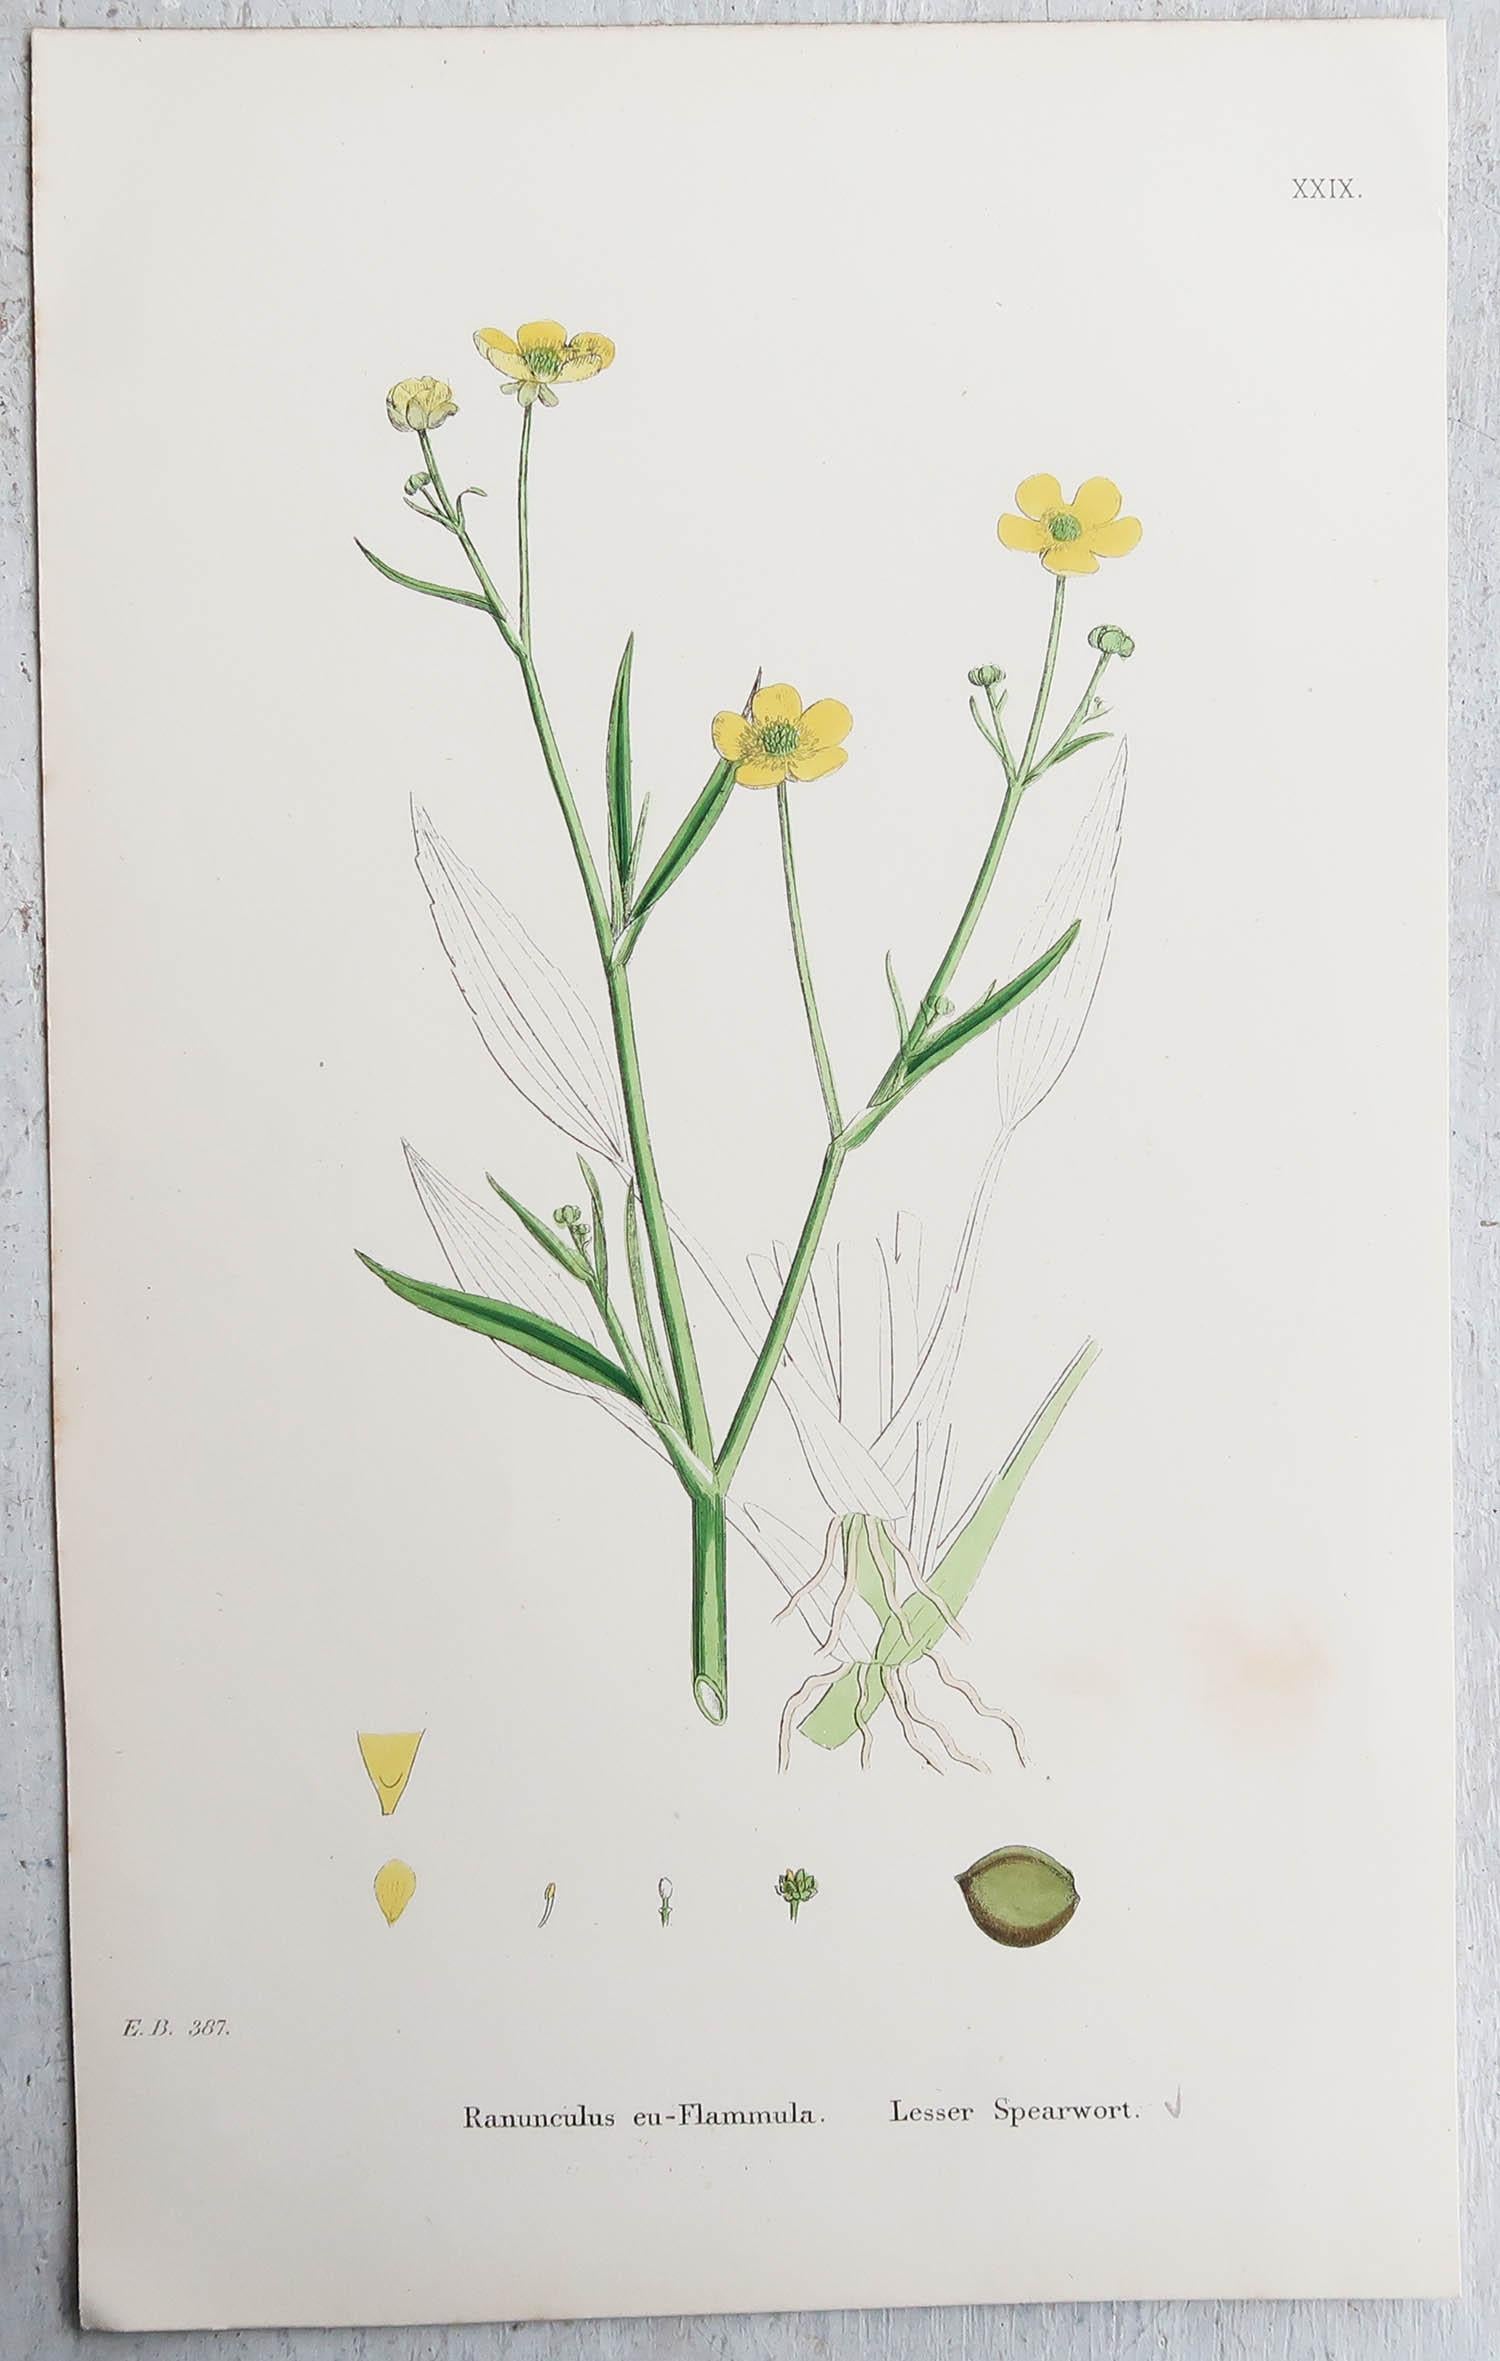 Wonderful set of 16 botanical prints

Lithographs after the original botanical drawings by Hooker.

Original color

Published, circa 1850

Unframed.

The measurement given is for one print.

